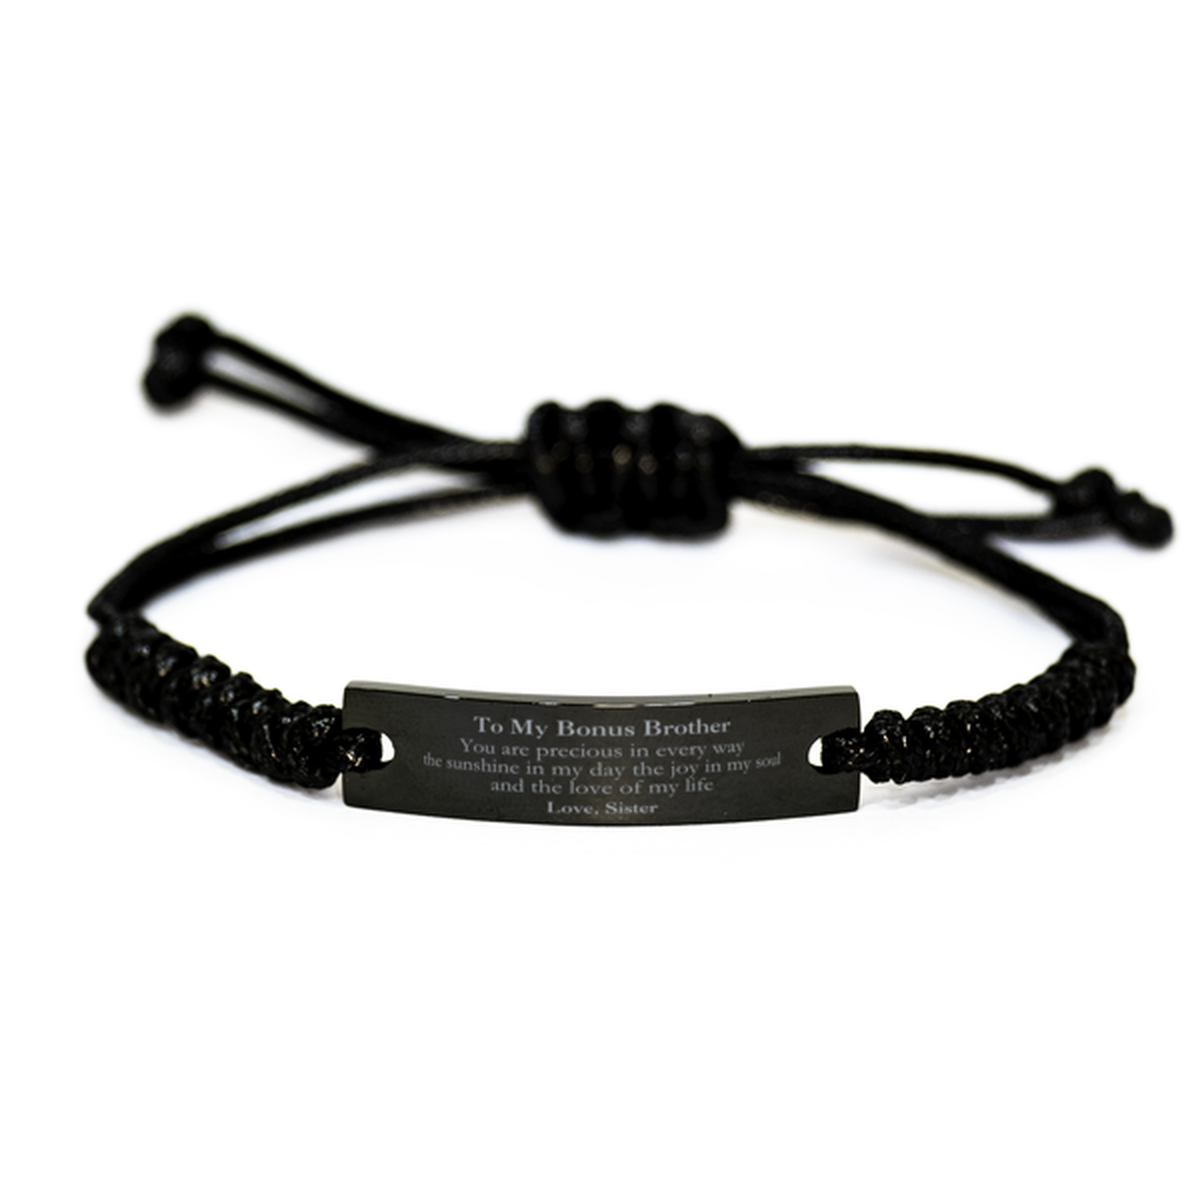 Graduation Gifts for Bonus Brother Black Rope Bracelet Present from Sister, Christmas Bonus Brother Birthday Gifts Bonus Brother You are precious in every way the sunshine in my day. Love, Sister